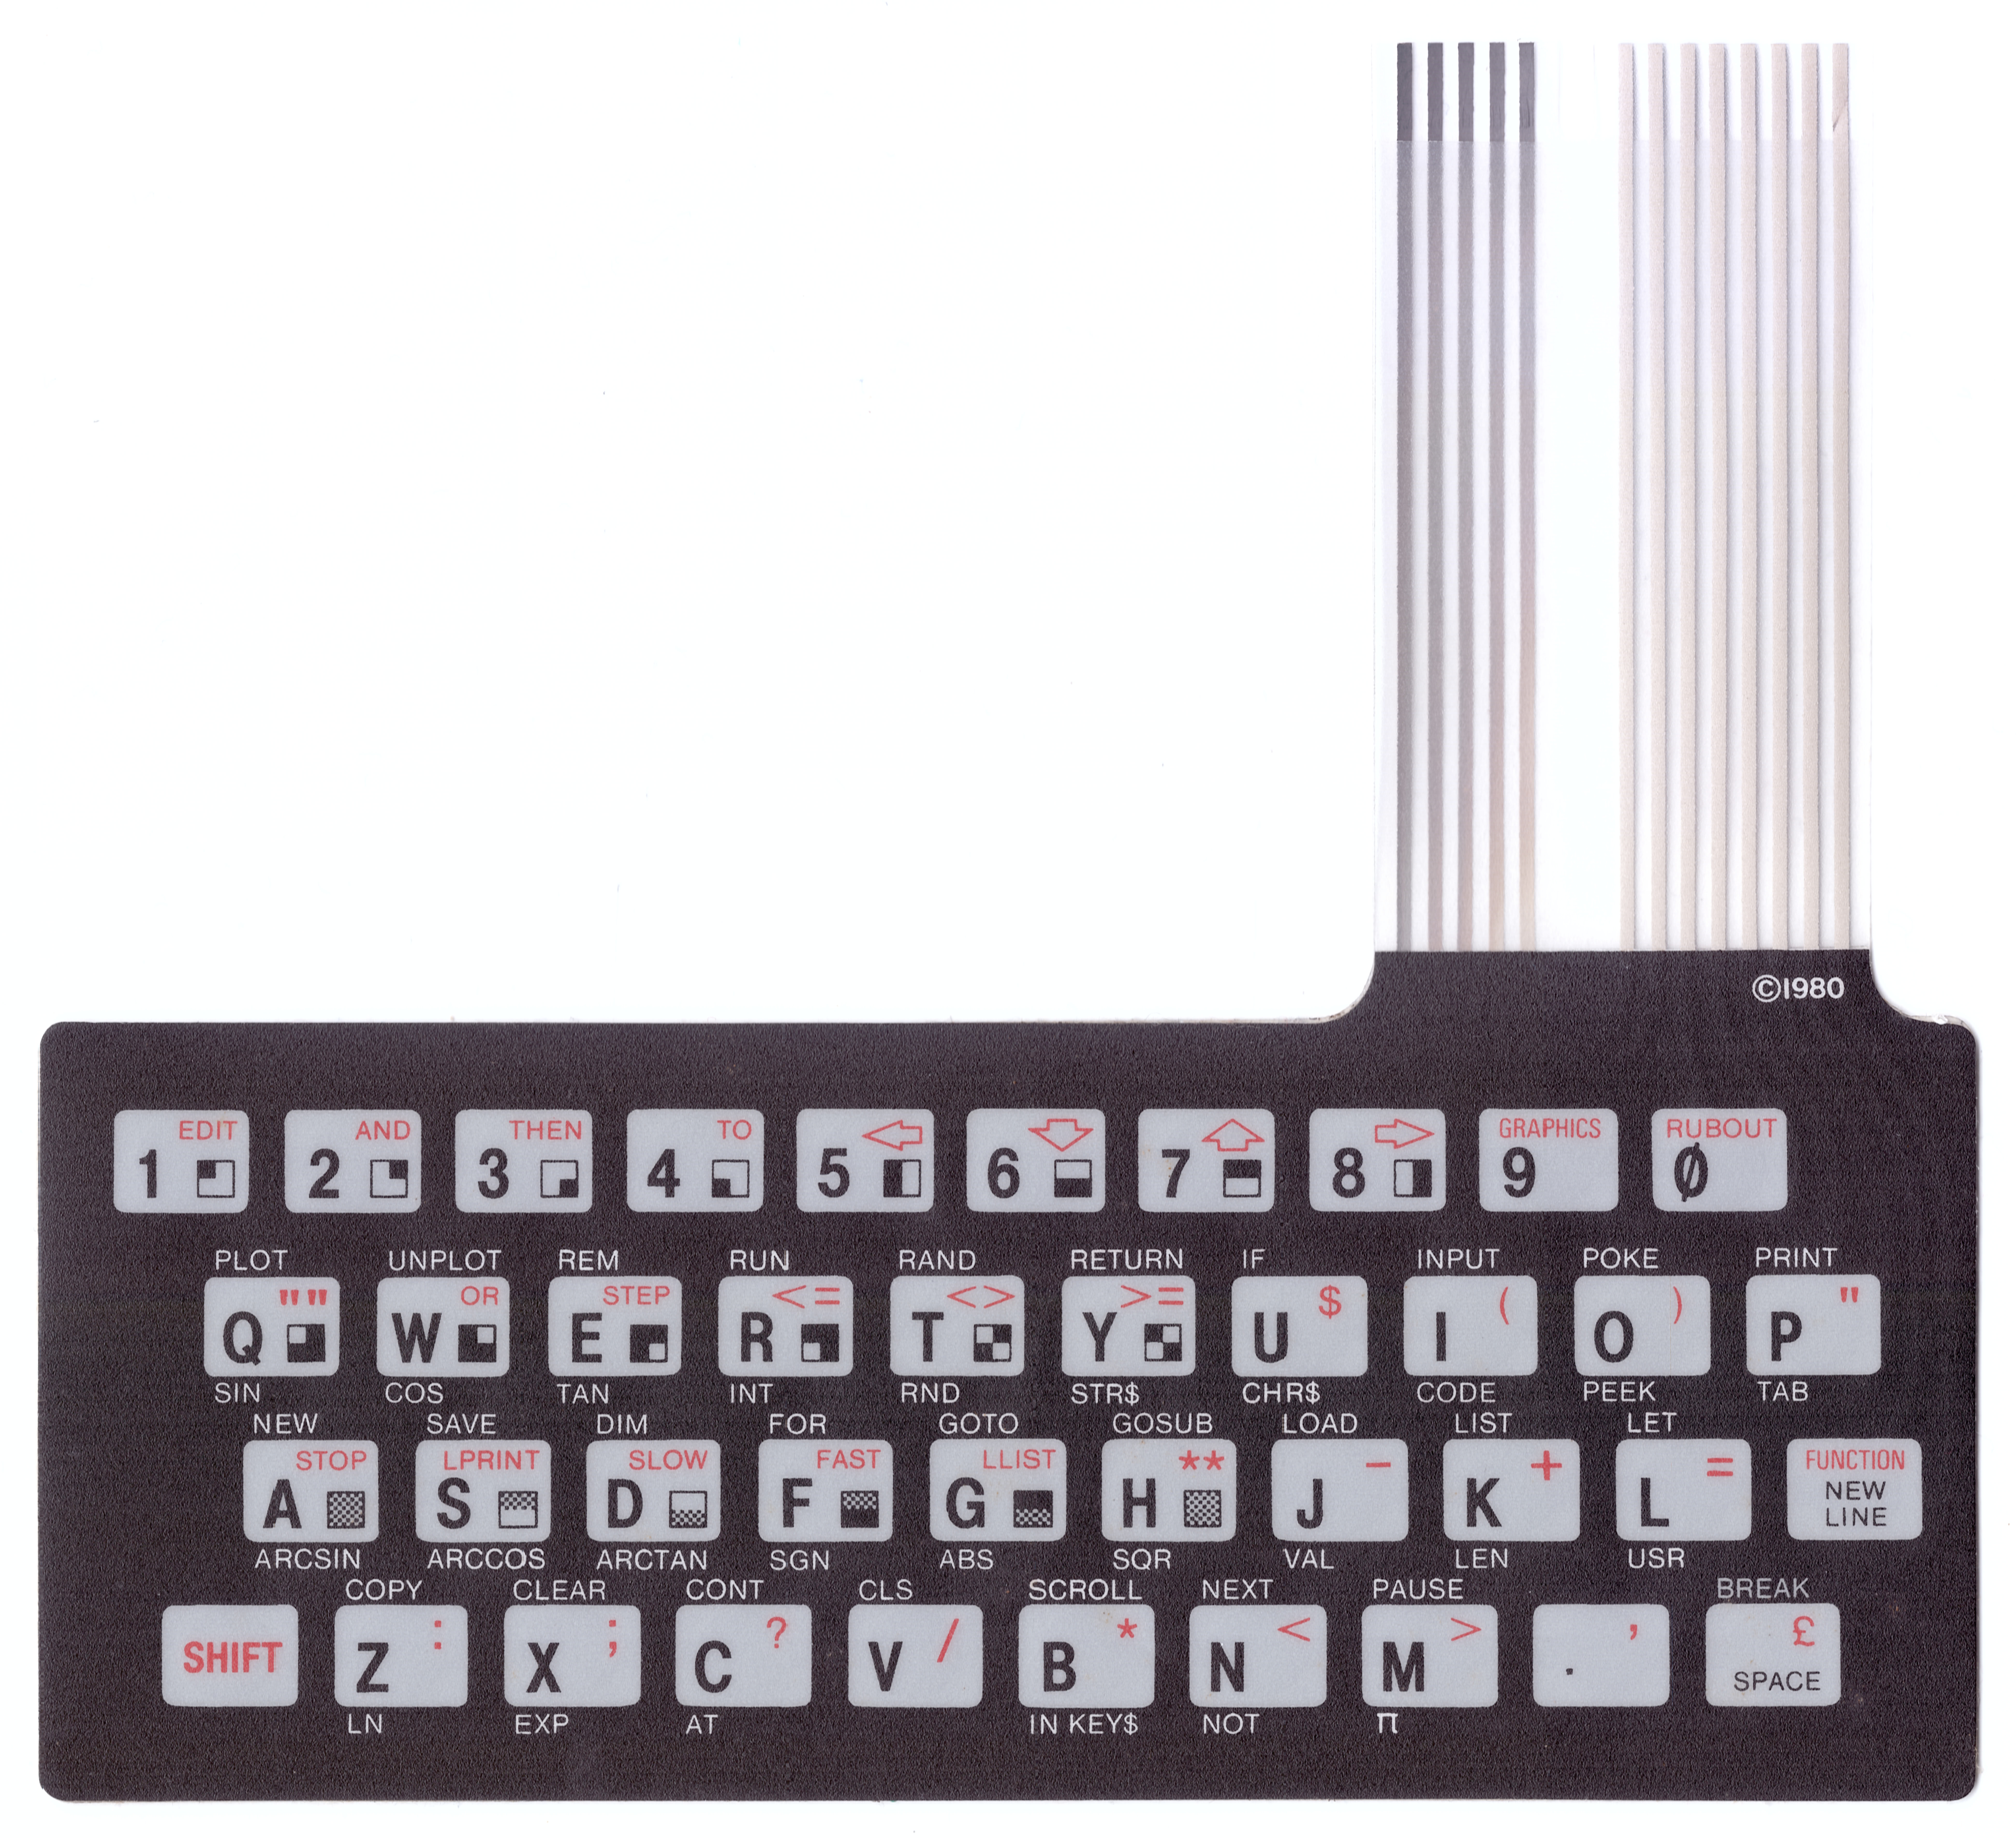 Sinclair ZX81 Kit – pagetable.com